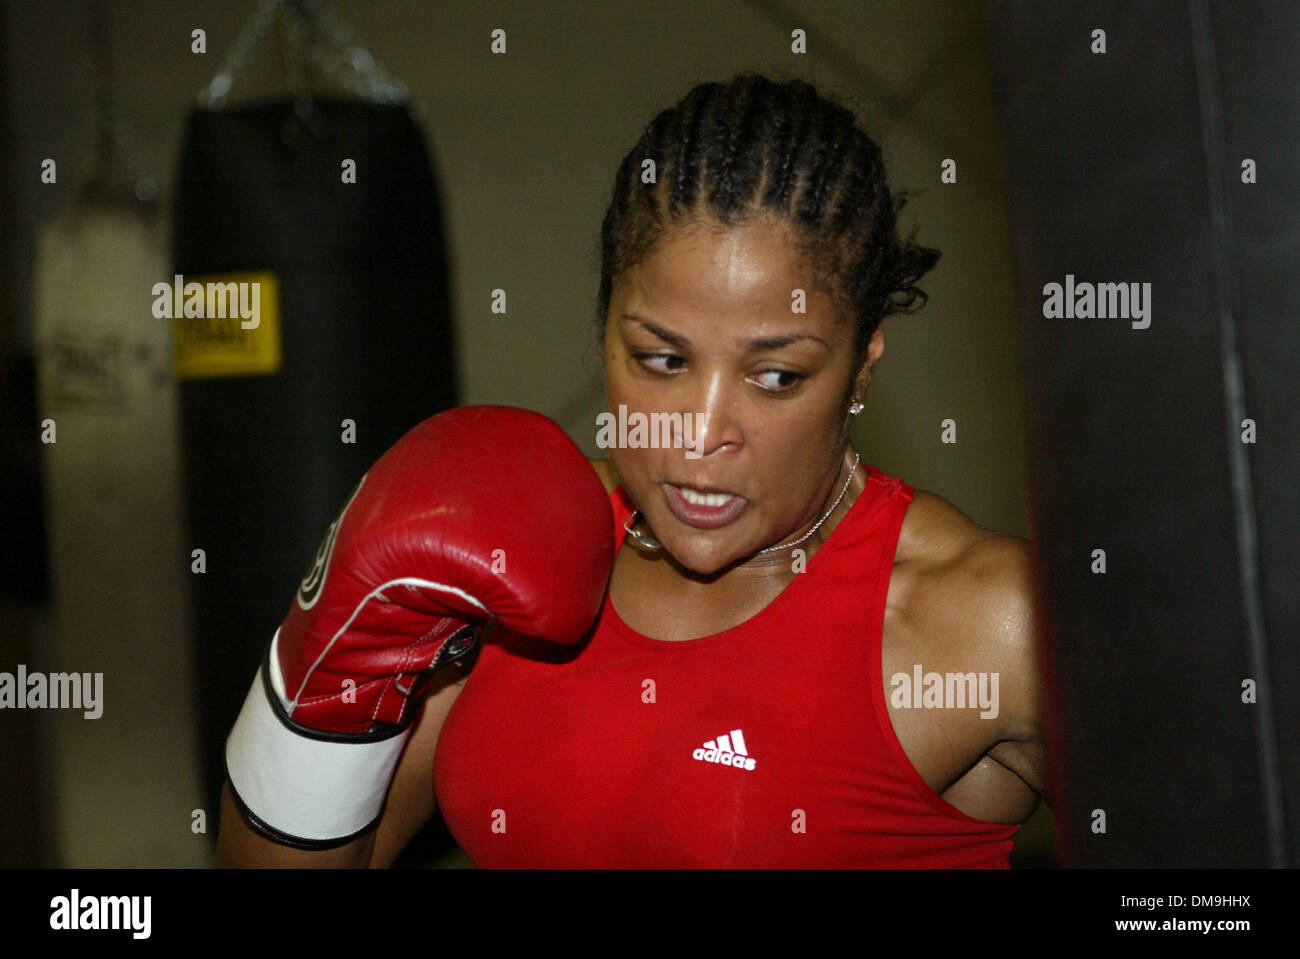 Nov 30, 2005; Las Vegas, NV, USA; BOXER: LAILA ALI daughter of living boxing legend Muhammad Ali trains at the Top Rank Gym in Las Vegas, Nevada preparing for her up coming fight with Swedish boxer Assa Sandell in Berlin, Germany at the Max Schmeling Arena on December 17, 2005.  Mandatory Credit: Photo by Mary Ann Owen/ZUMA Press. (©) Copyright 2005 by Mary Ann Owen Stock Photo